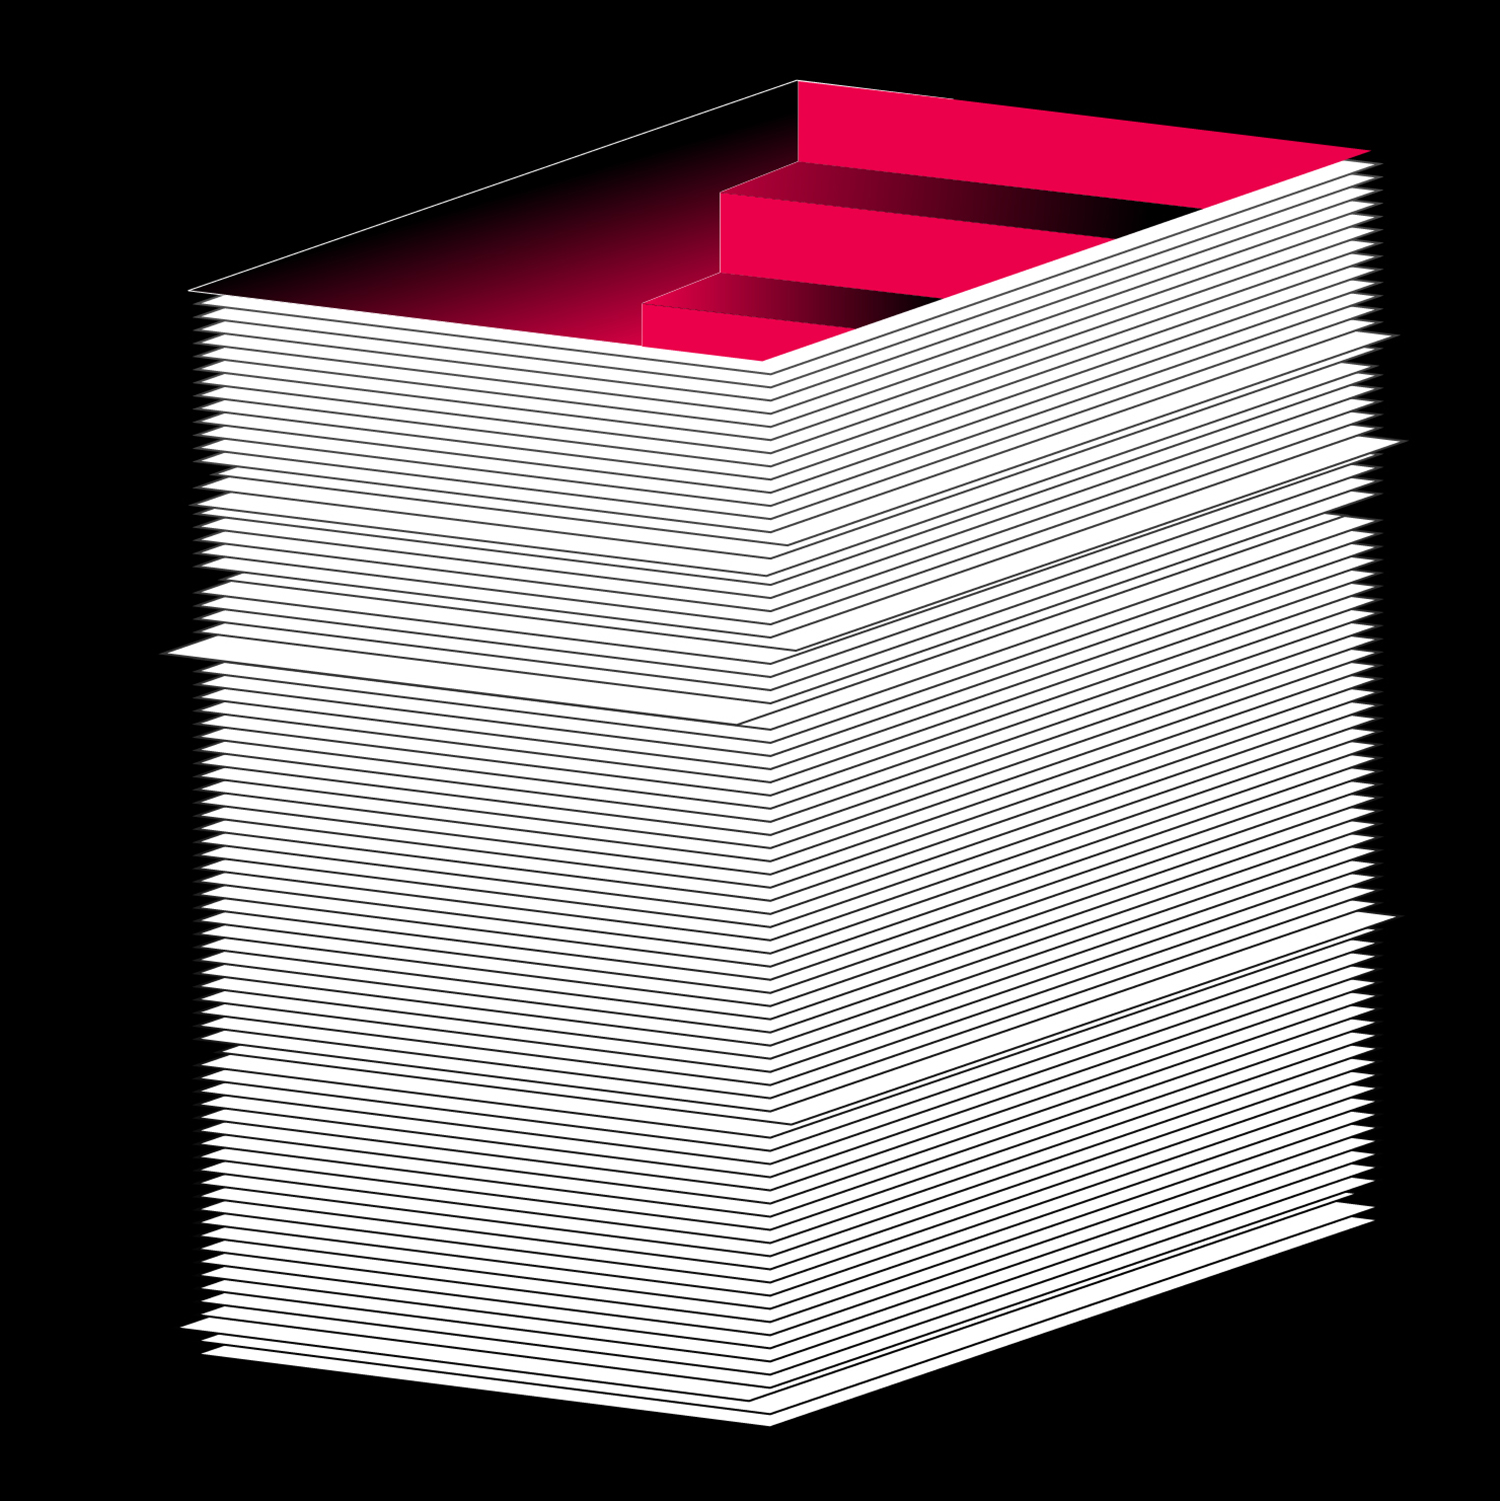 Illustration with black background and a red ominous staircase ascending out of a stack of white paper.